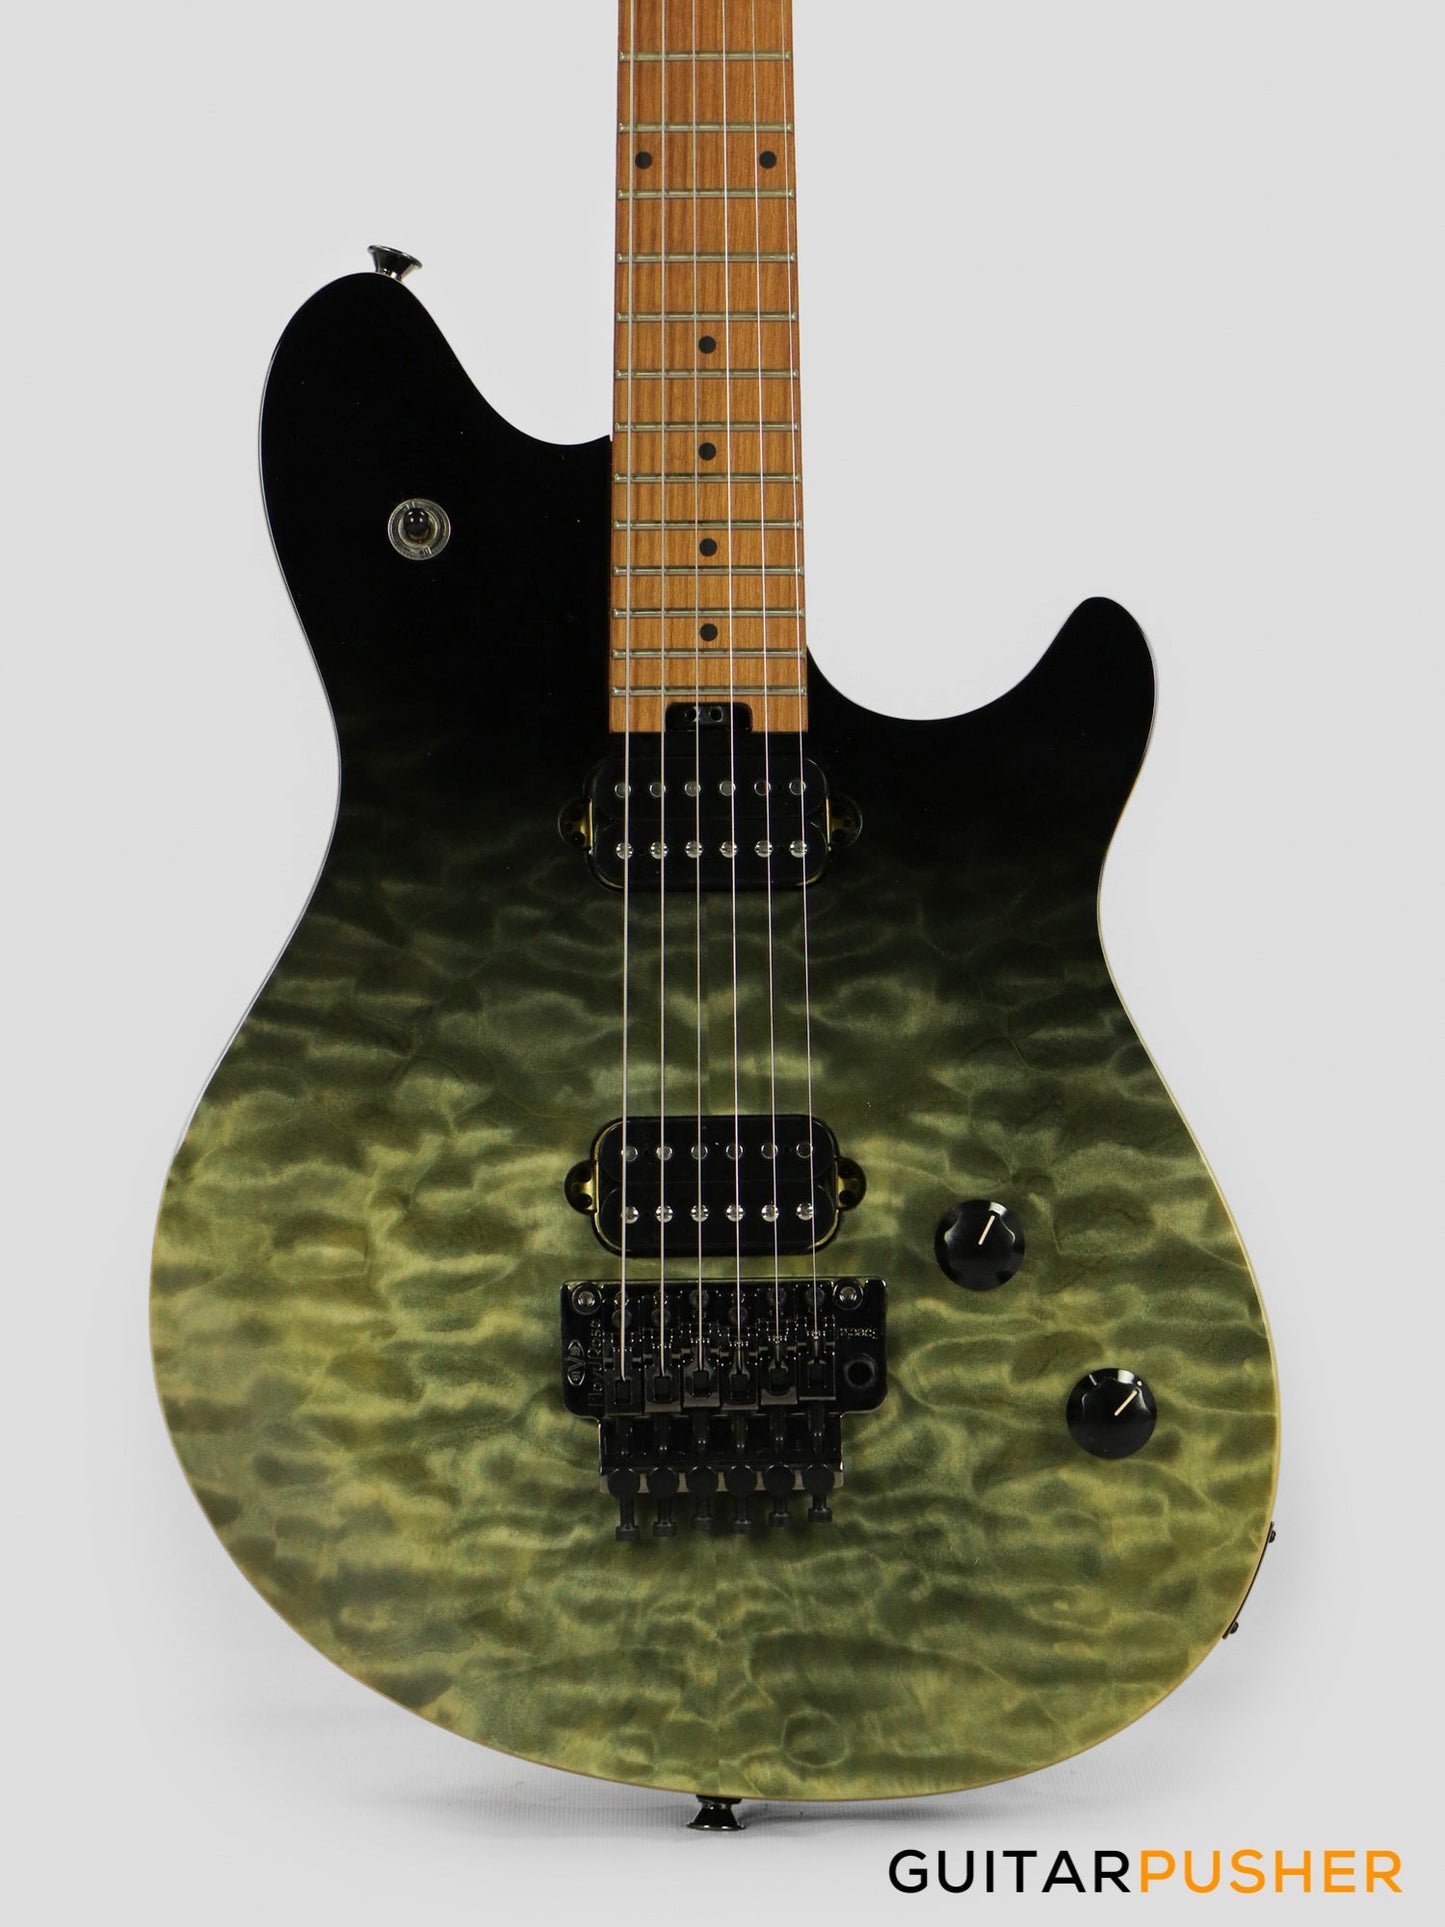 Wolfgang EVH WG QM (Quilted Maple) Standard Electric Guitar - Black Fade